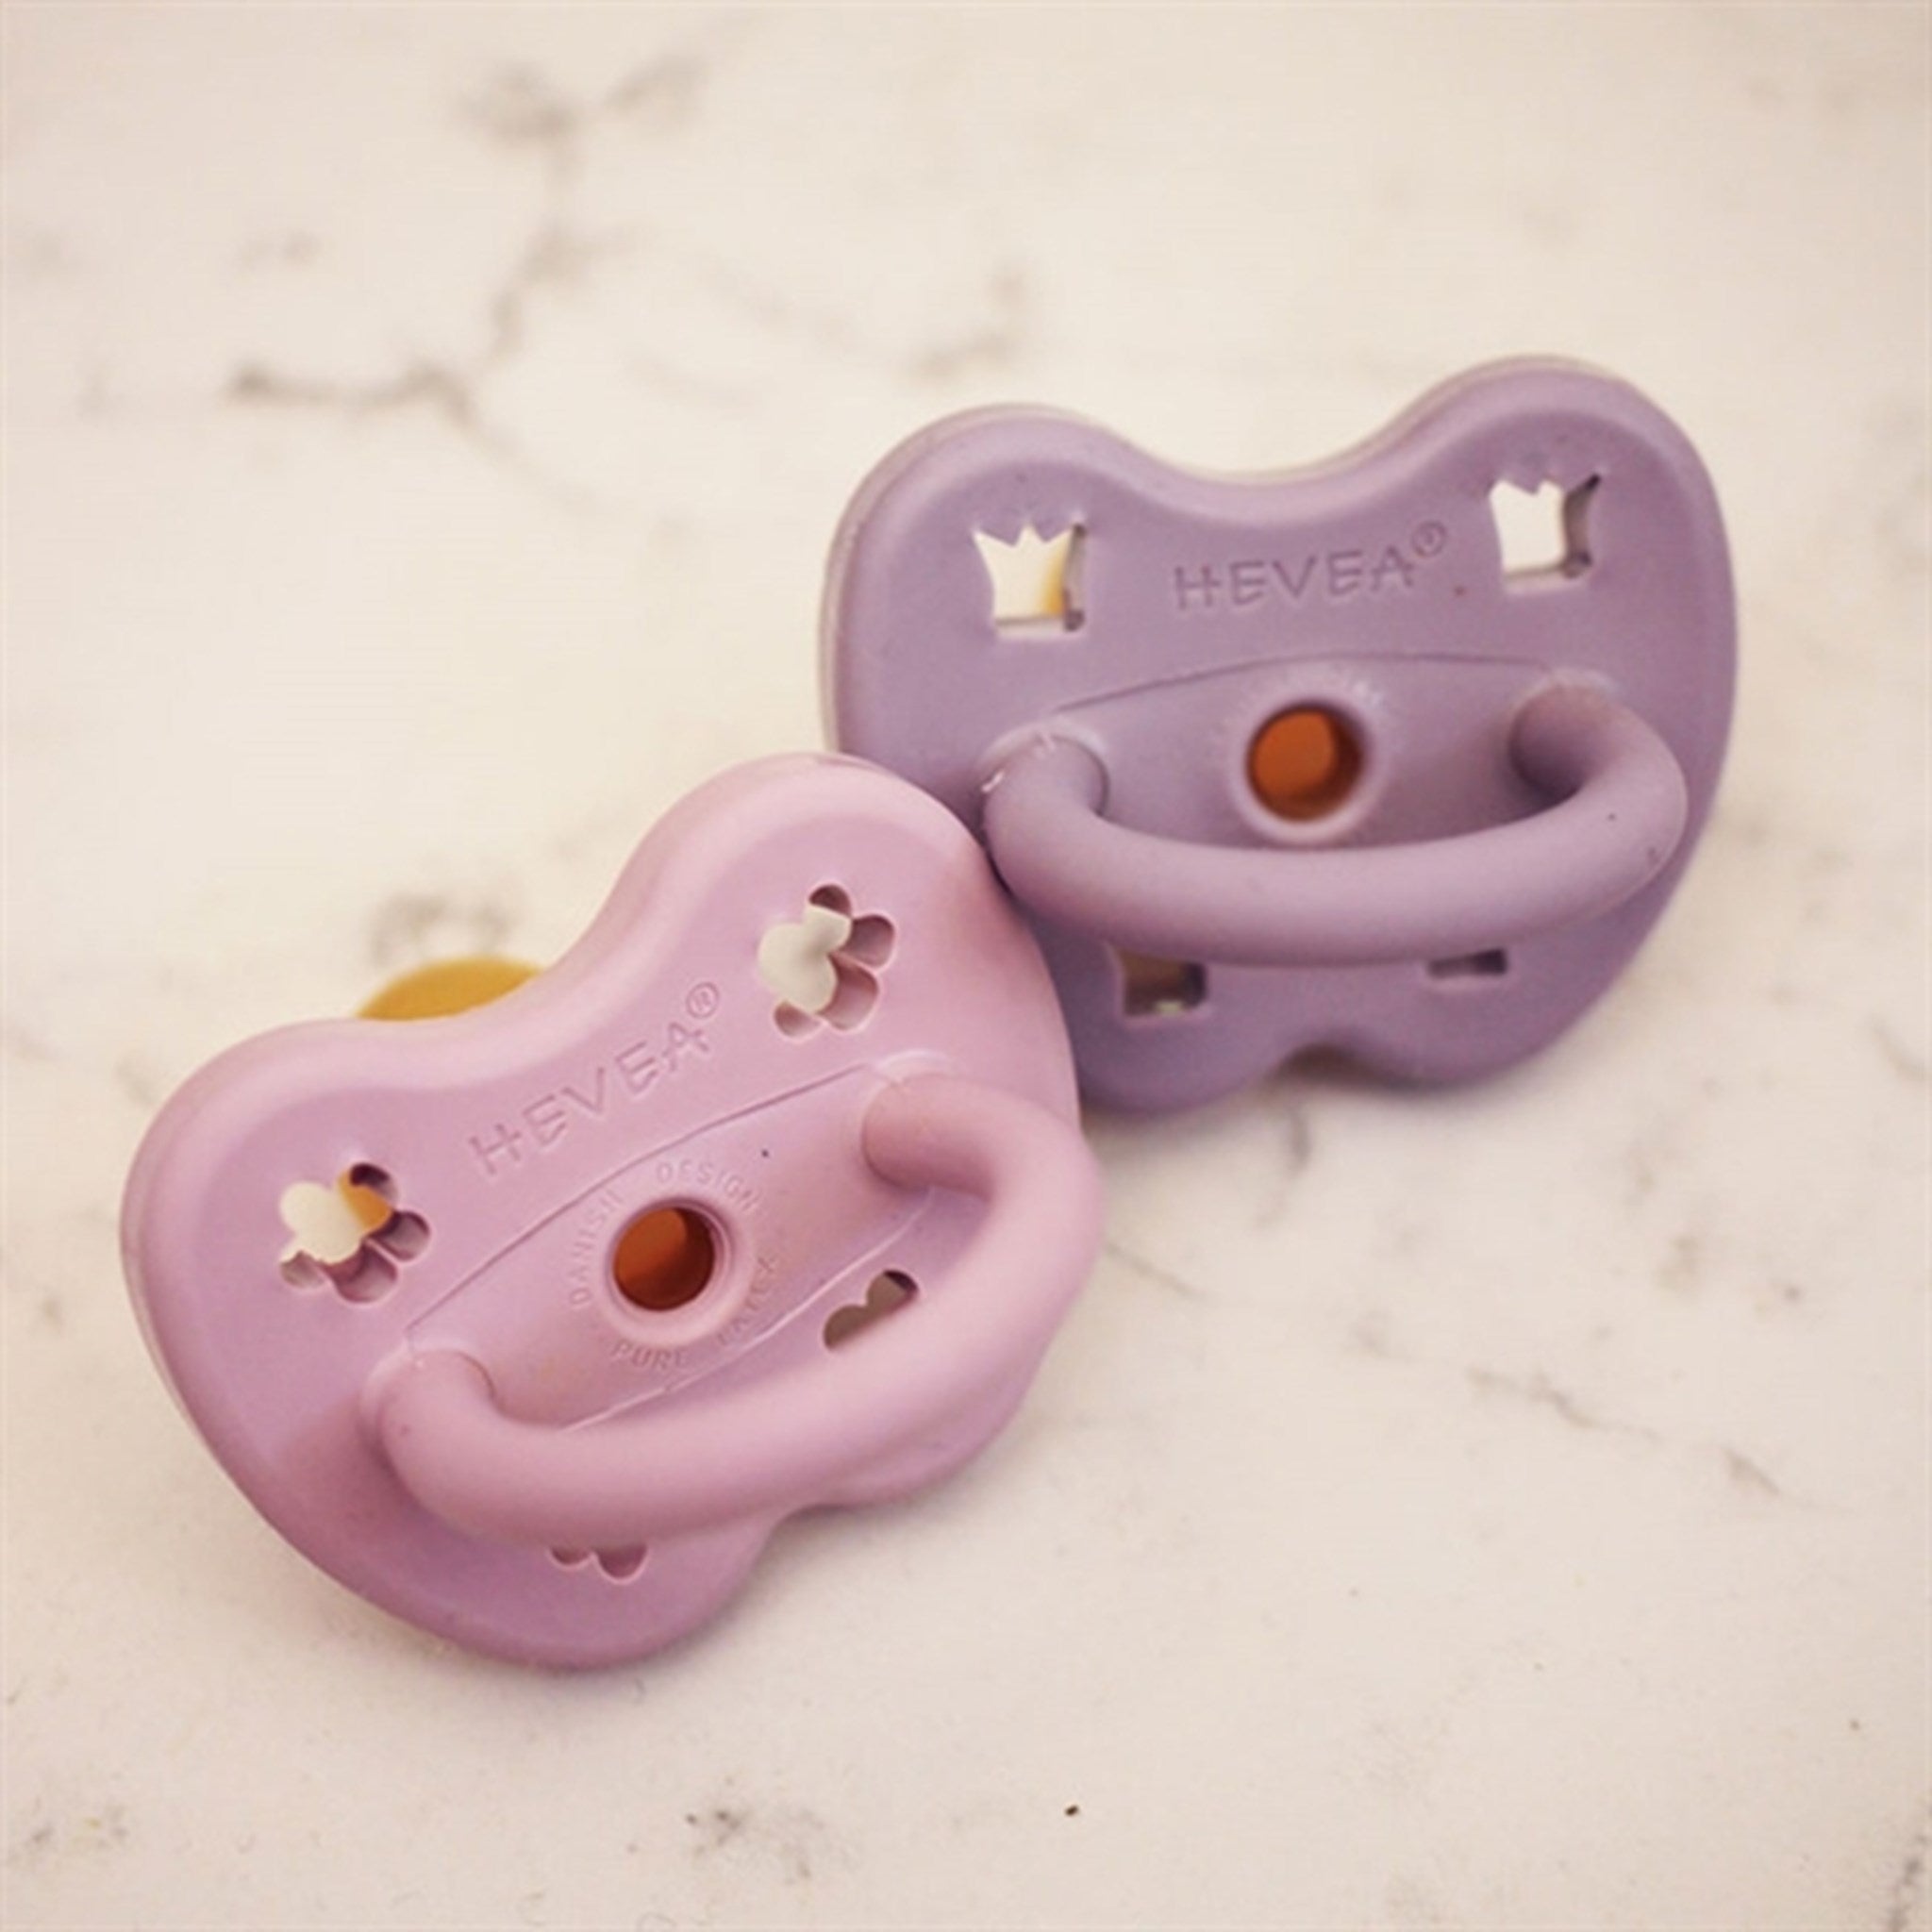 Hevea Pacifier 2-Pack Round Classic Dusty Violet & Light Orchid 2